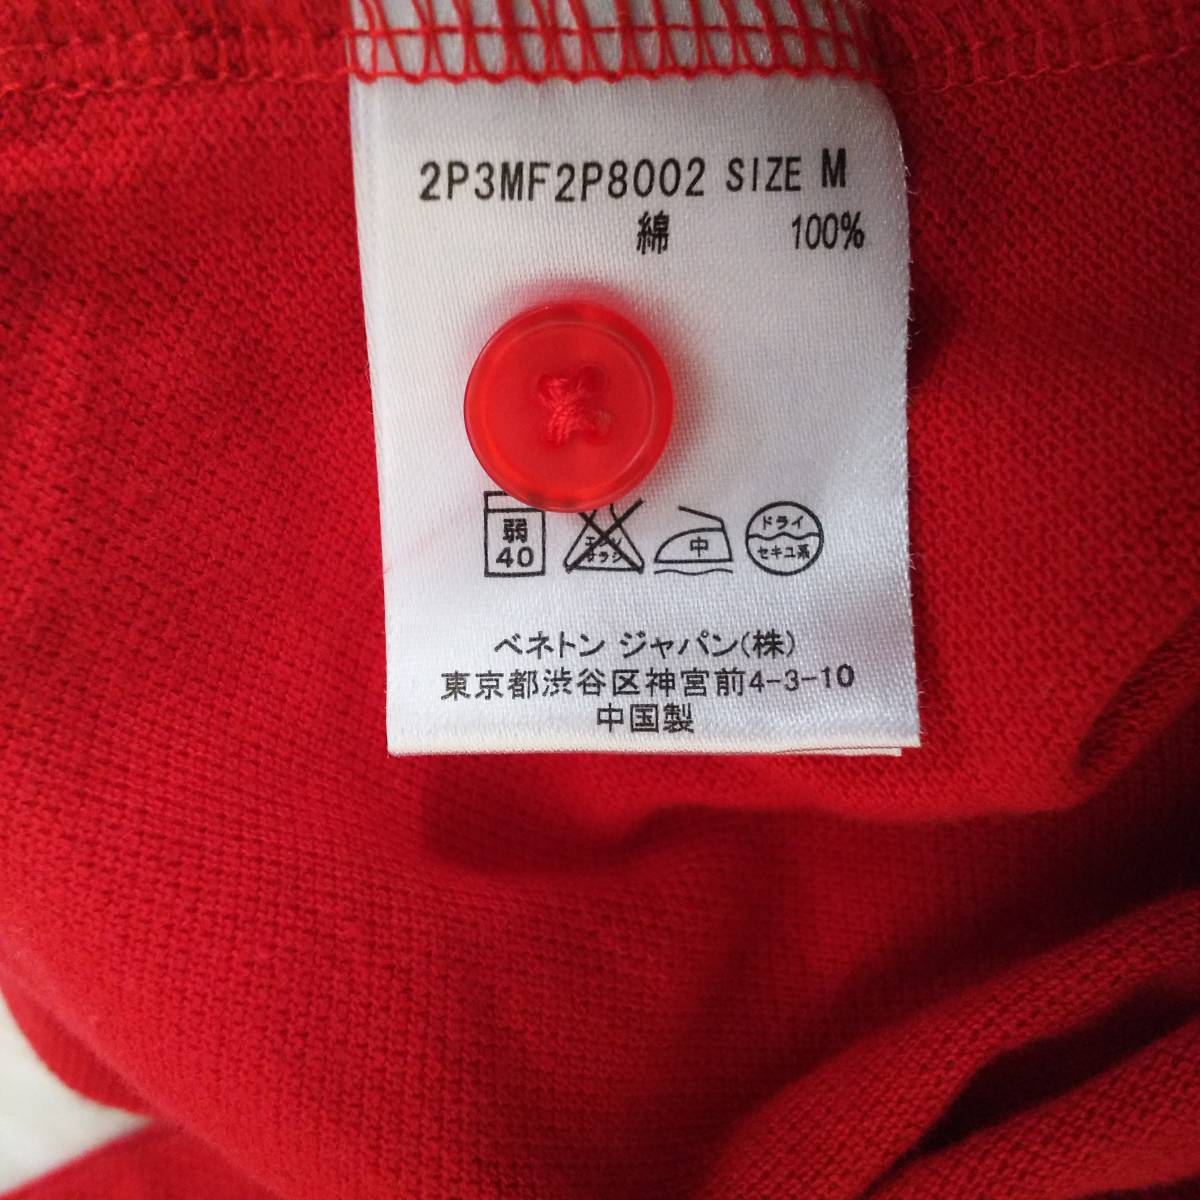 *BENETTON Benetton polo-shirt with short sleeves red M*